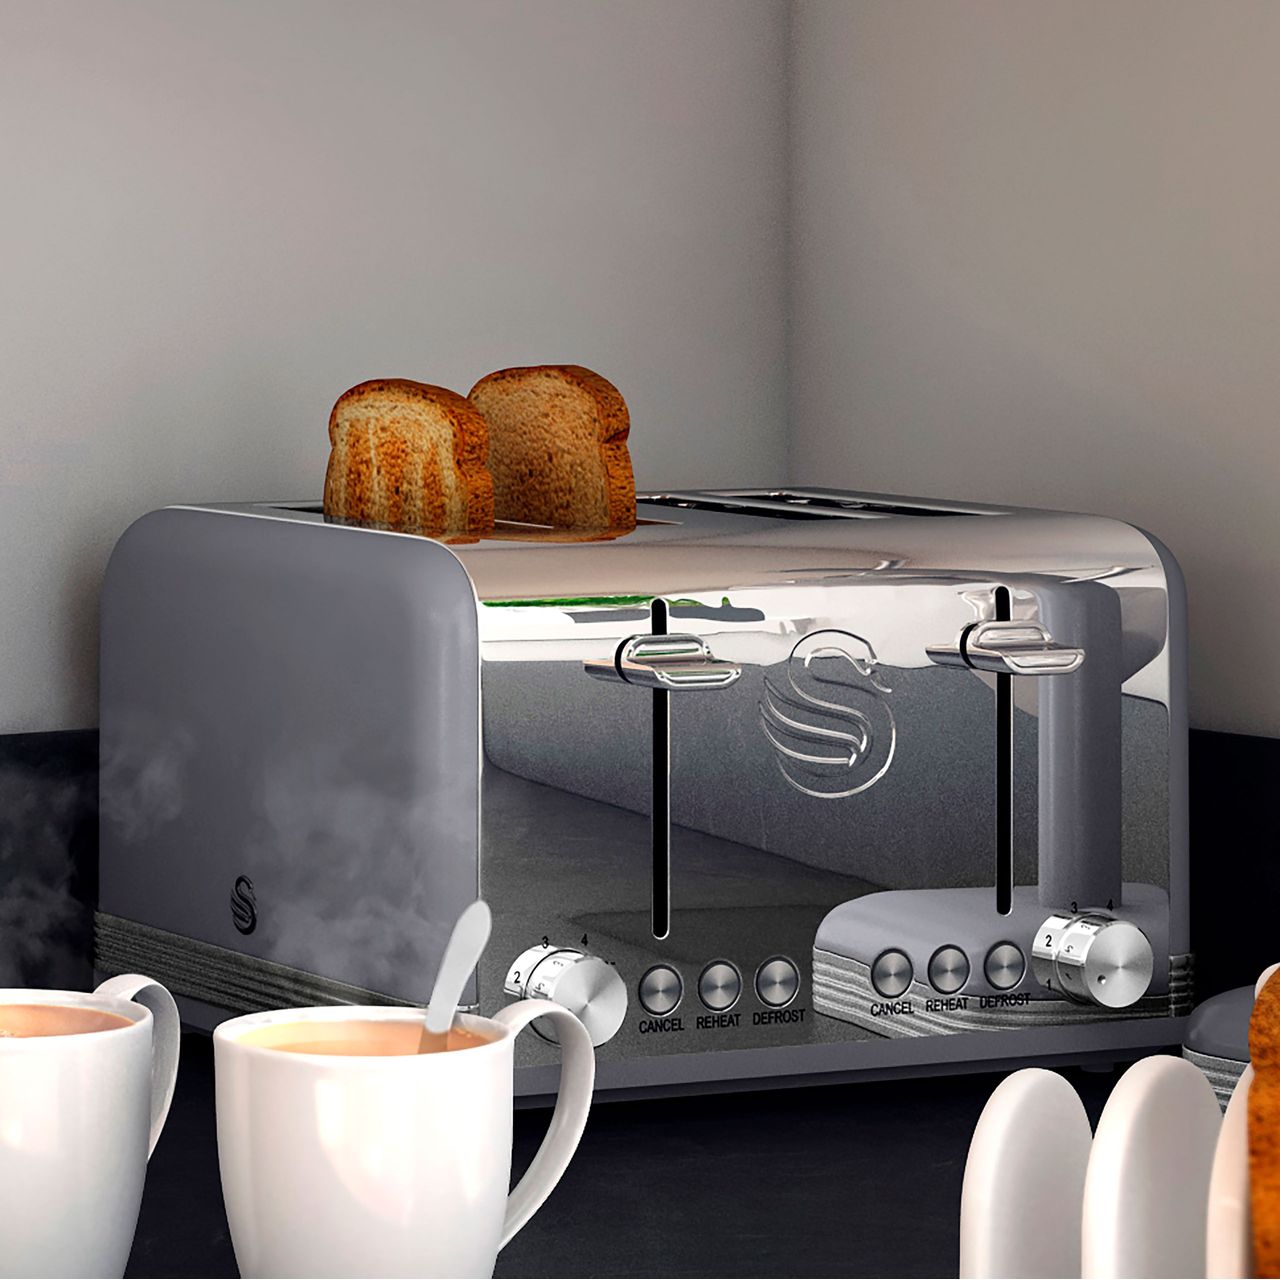 Swan Retro ST19020GRN 4 Slice Toaster Review